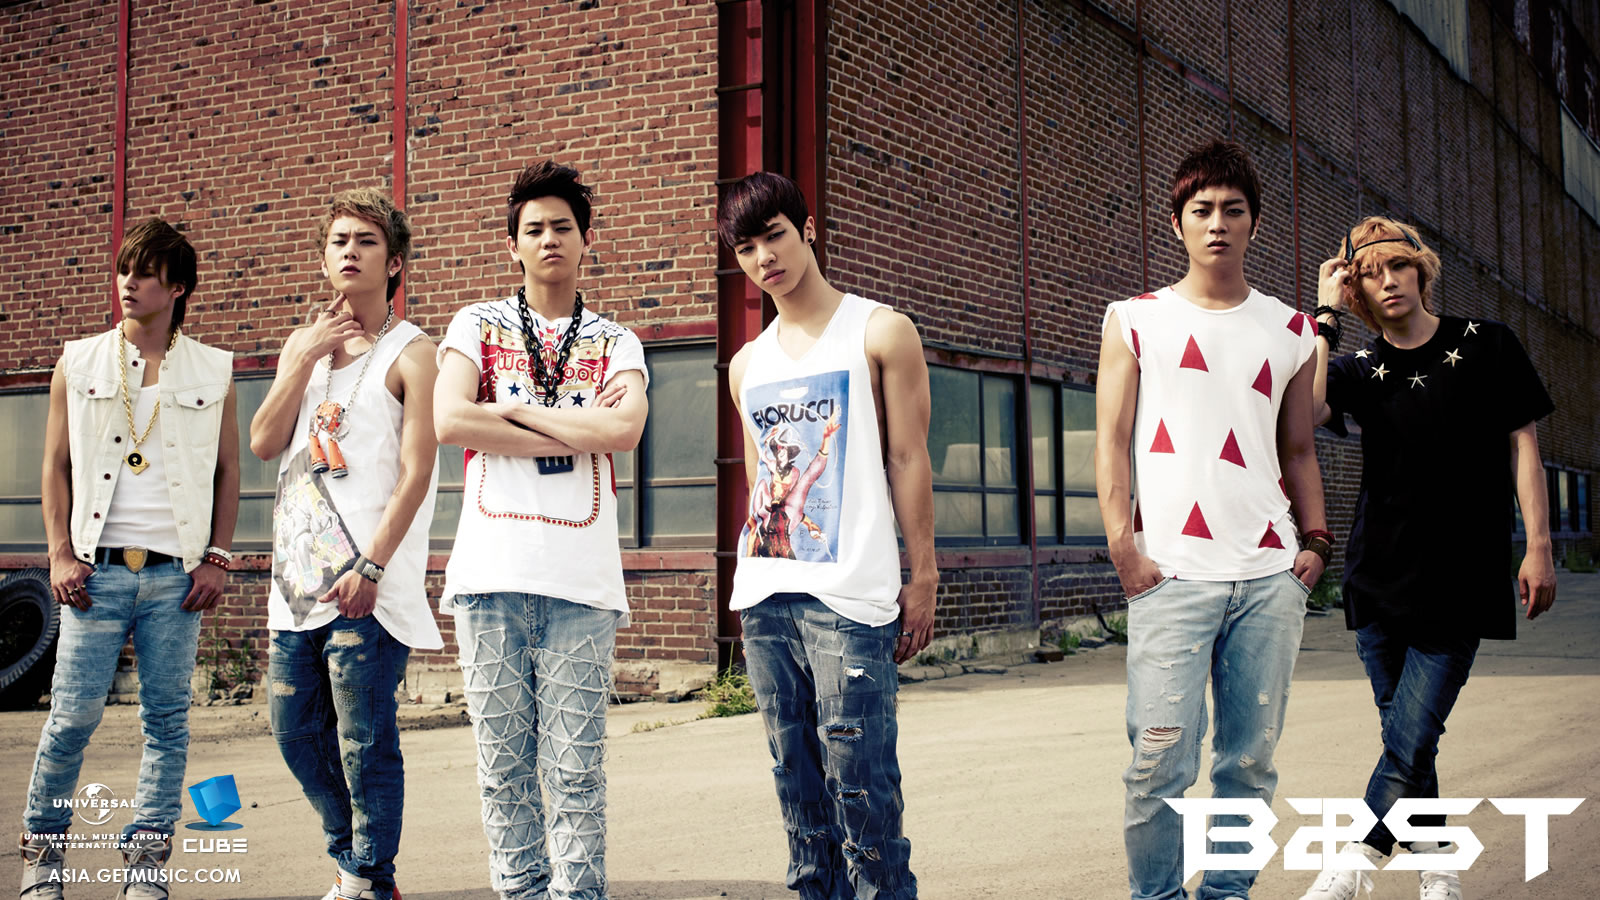 B2St Wallpapers